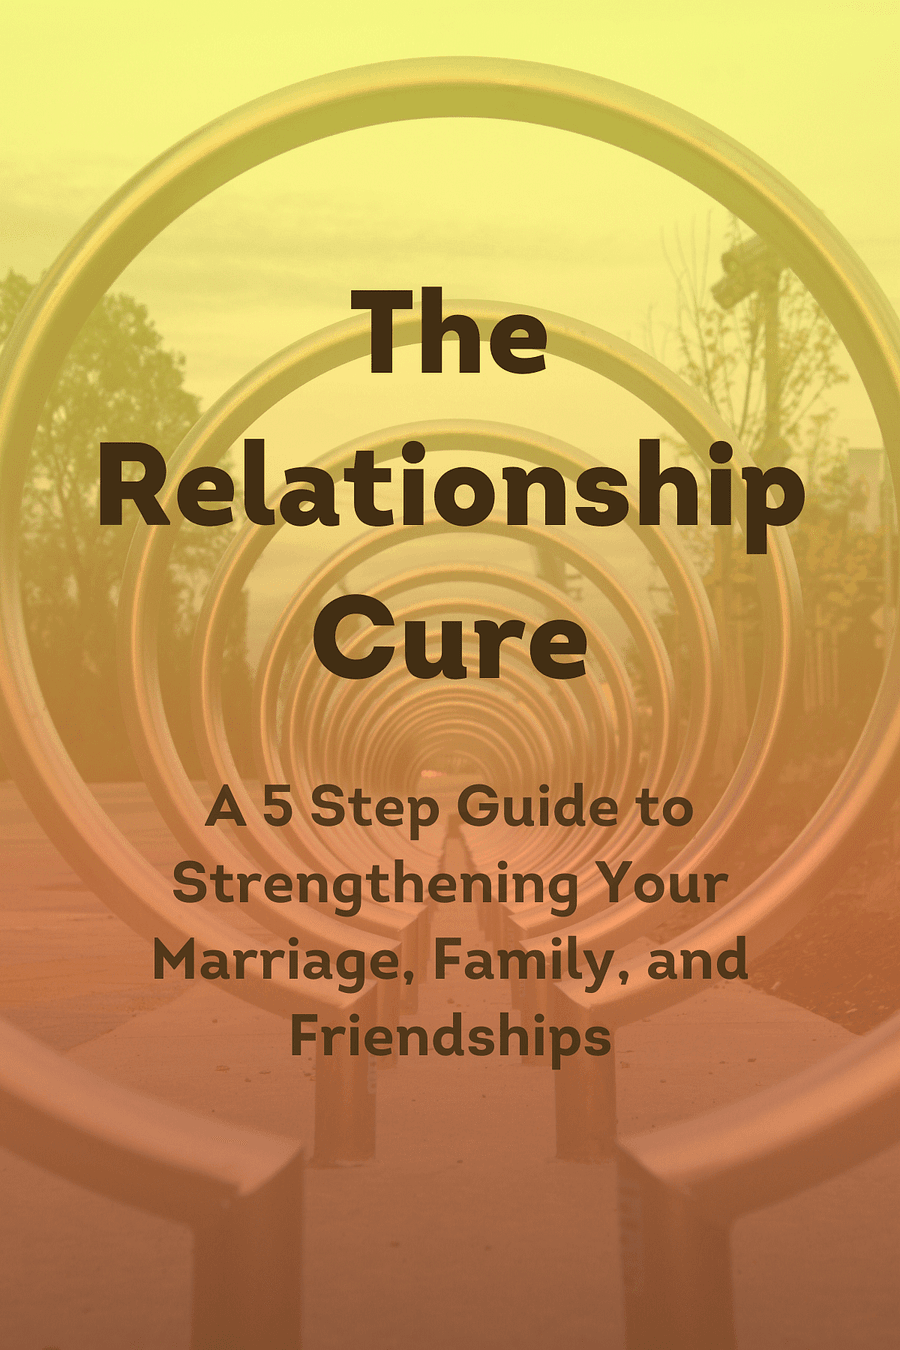 The Relationship Cure by John Gottman, Joan DeClaire - Book Summary